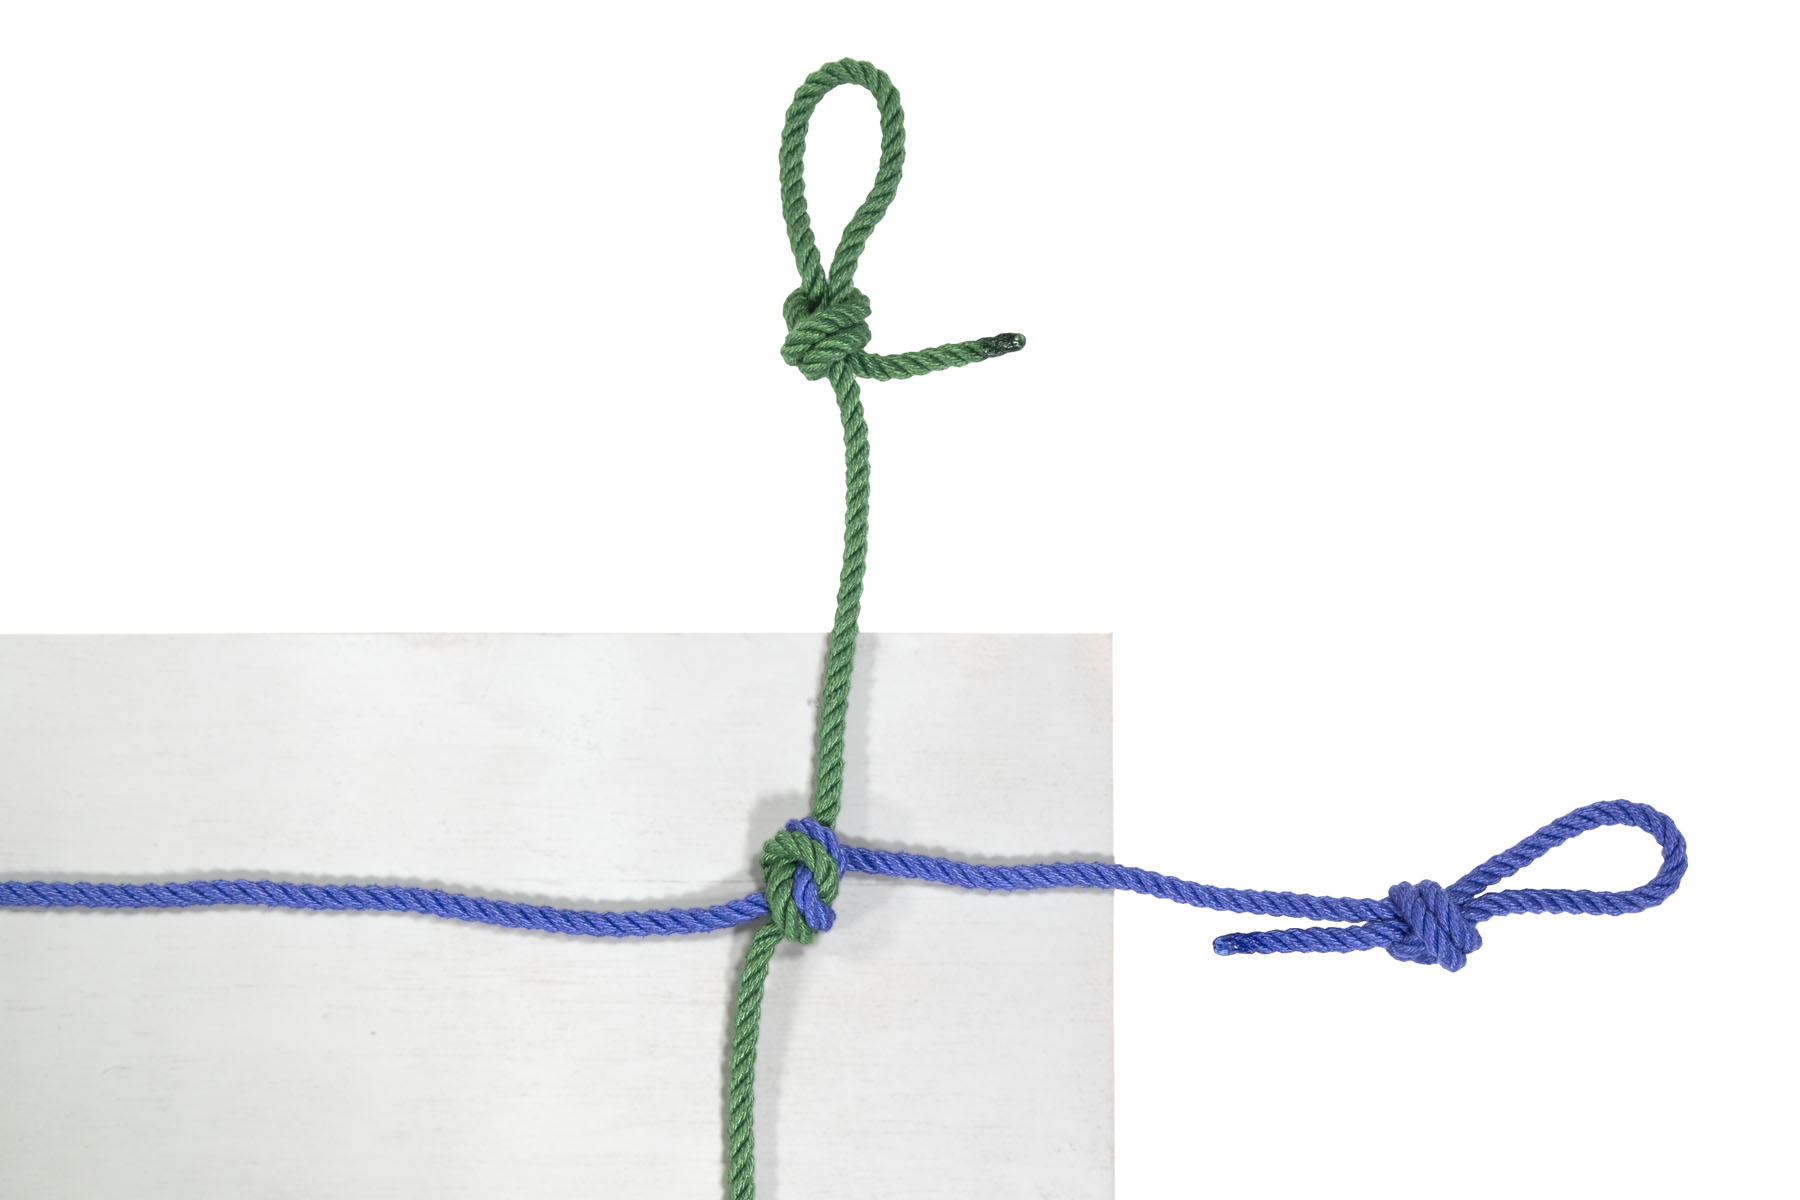 The ropes lie in the same position as before, but they are now tied together with an overhand knot at the point where the blue rope crossed the green rope.